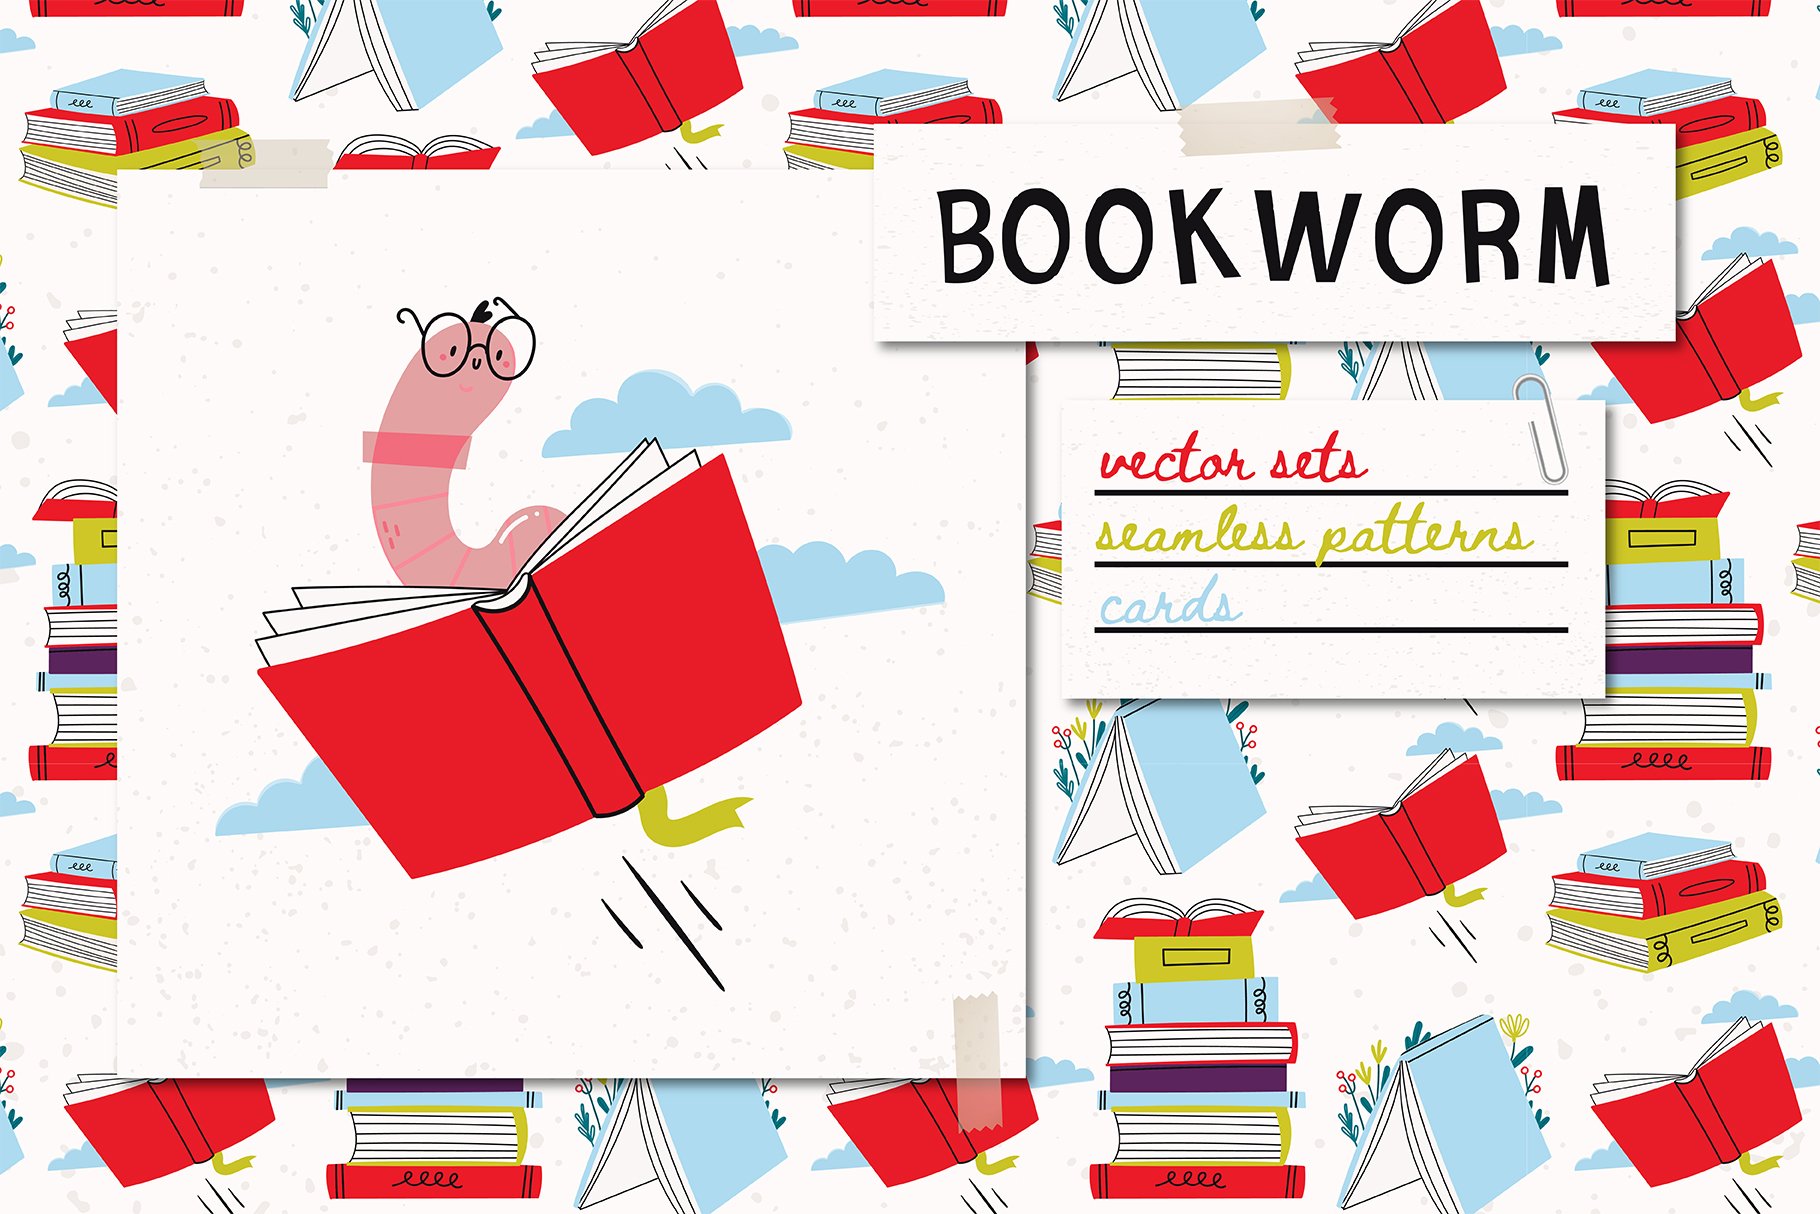 Bookworm cover image.